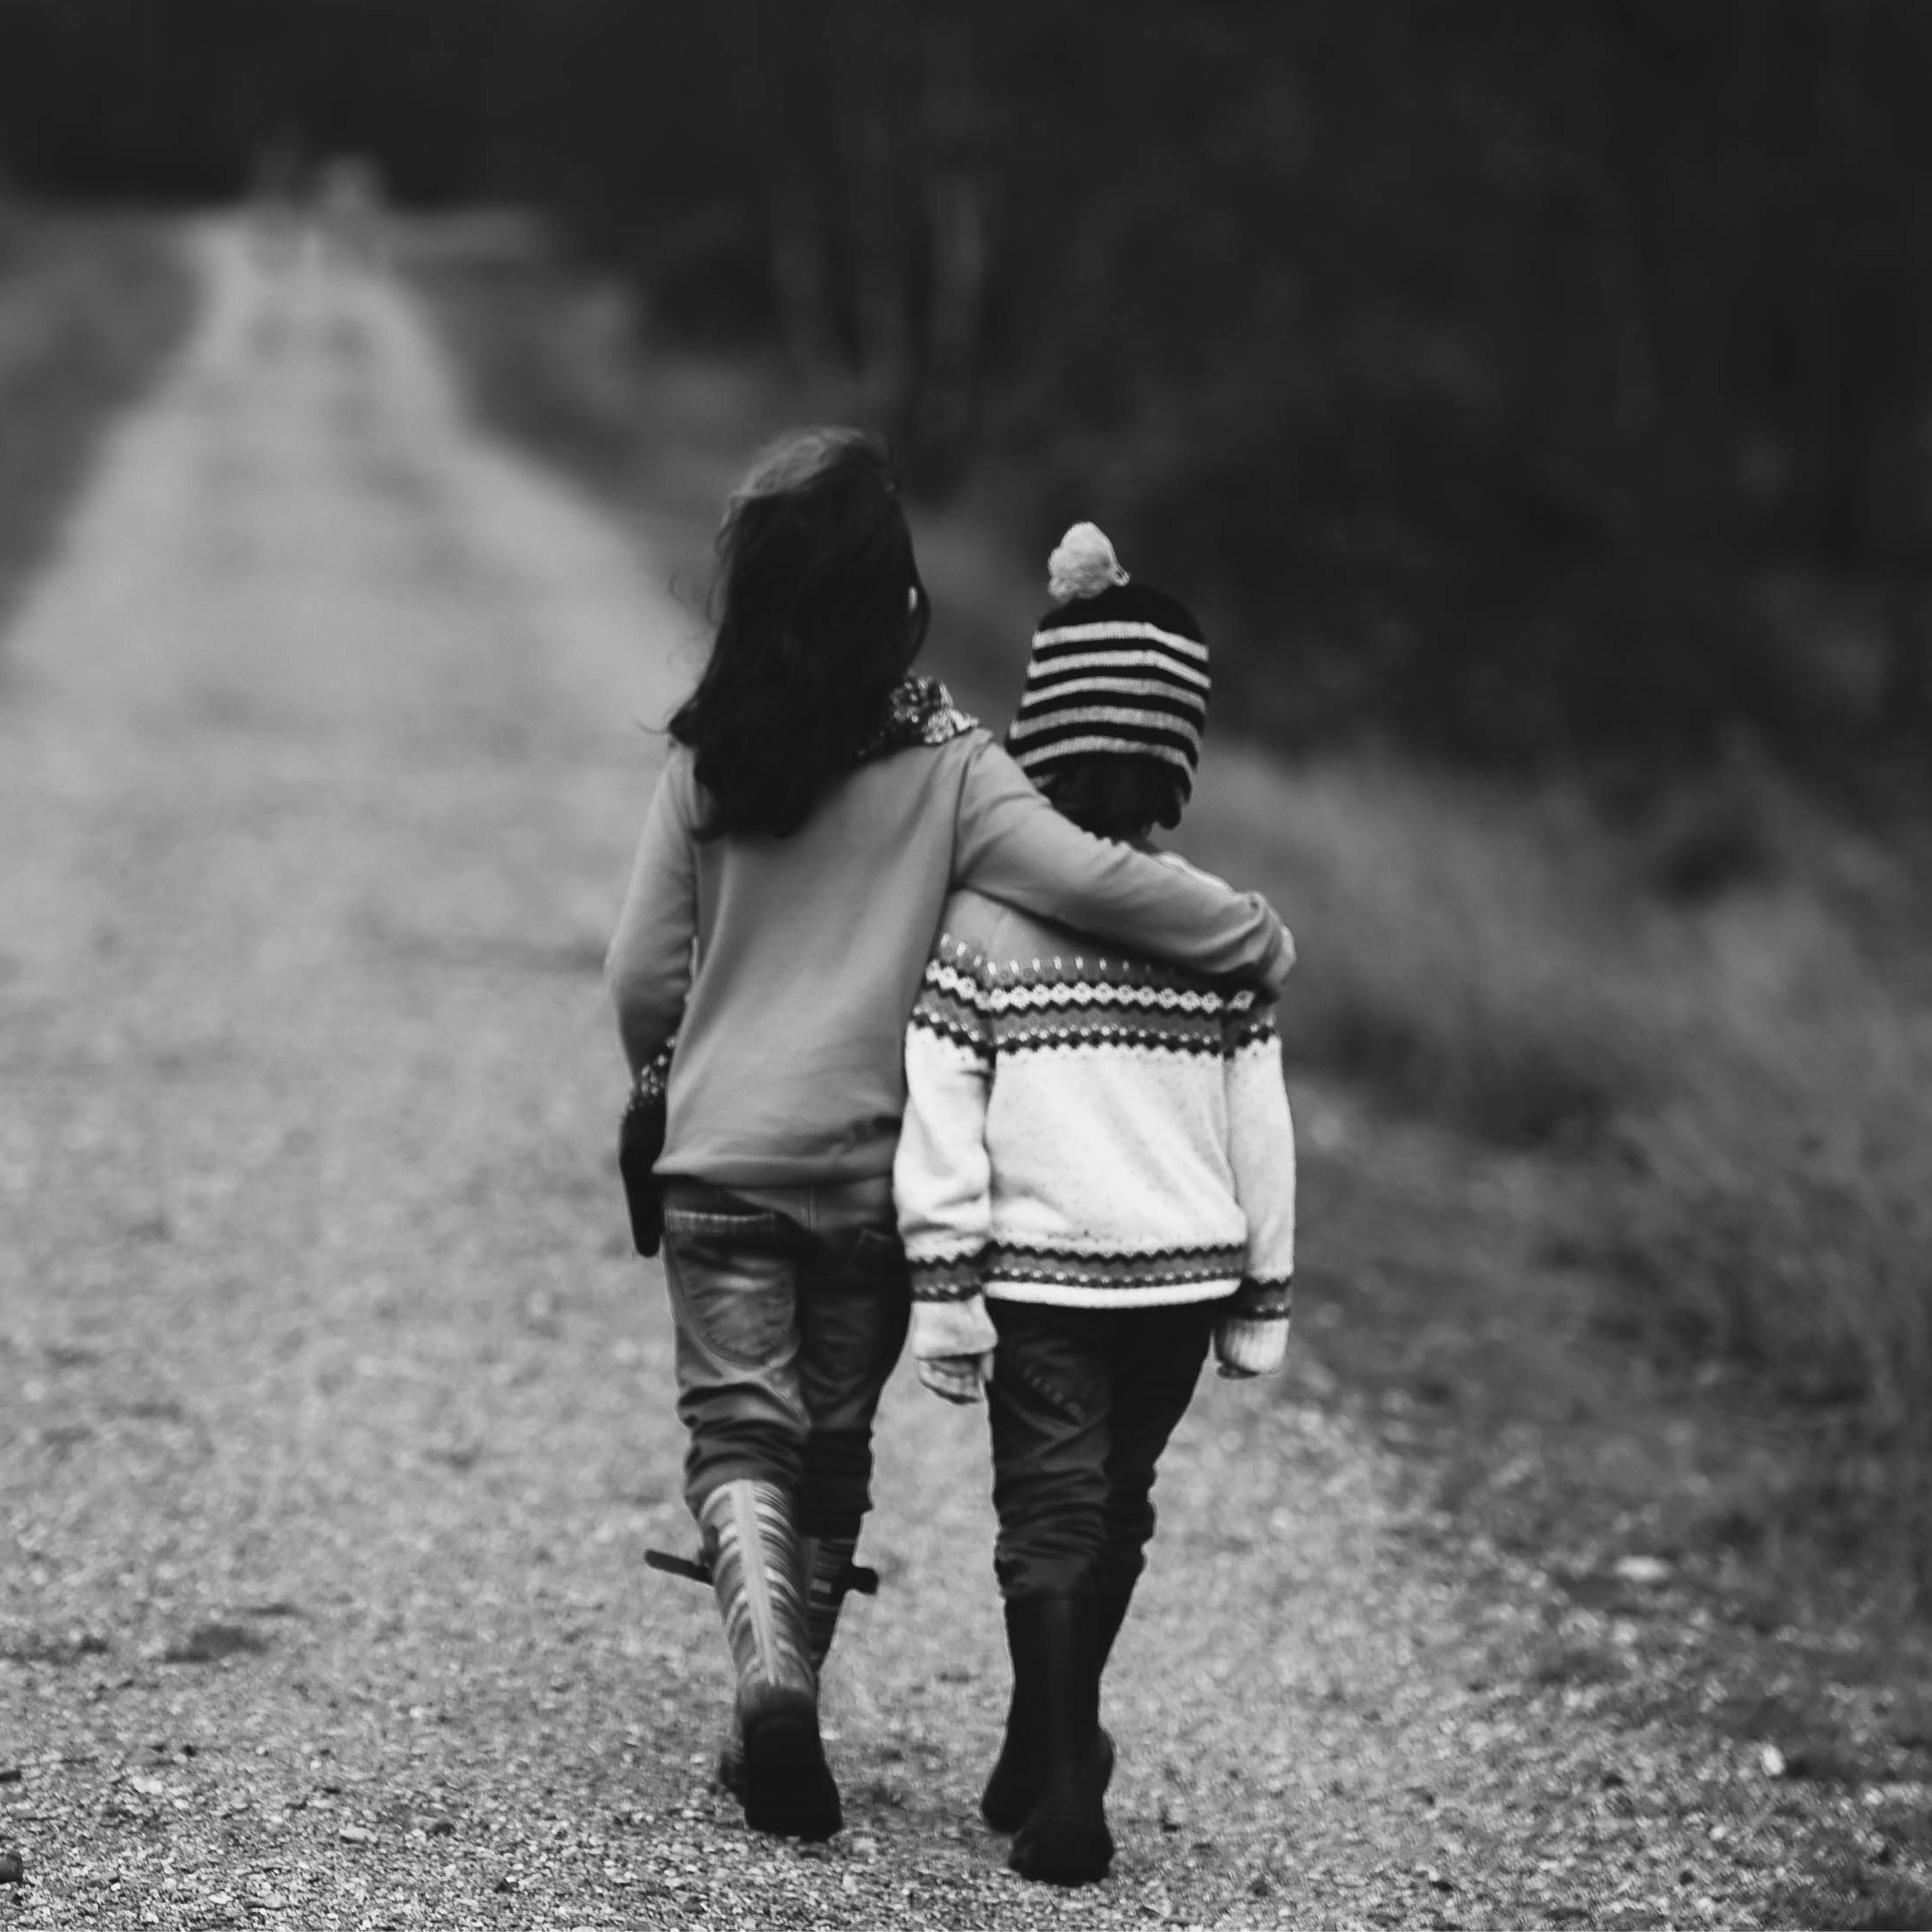 Two children hugging each other walking along a gravel path signifying the Edward Christopher luxury watch brand's mission to support children & young people